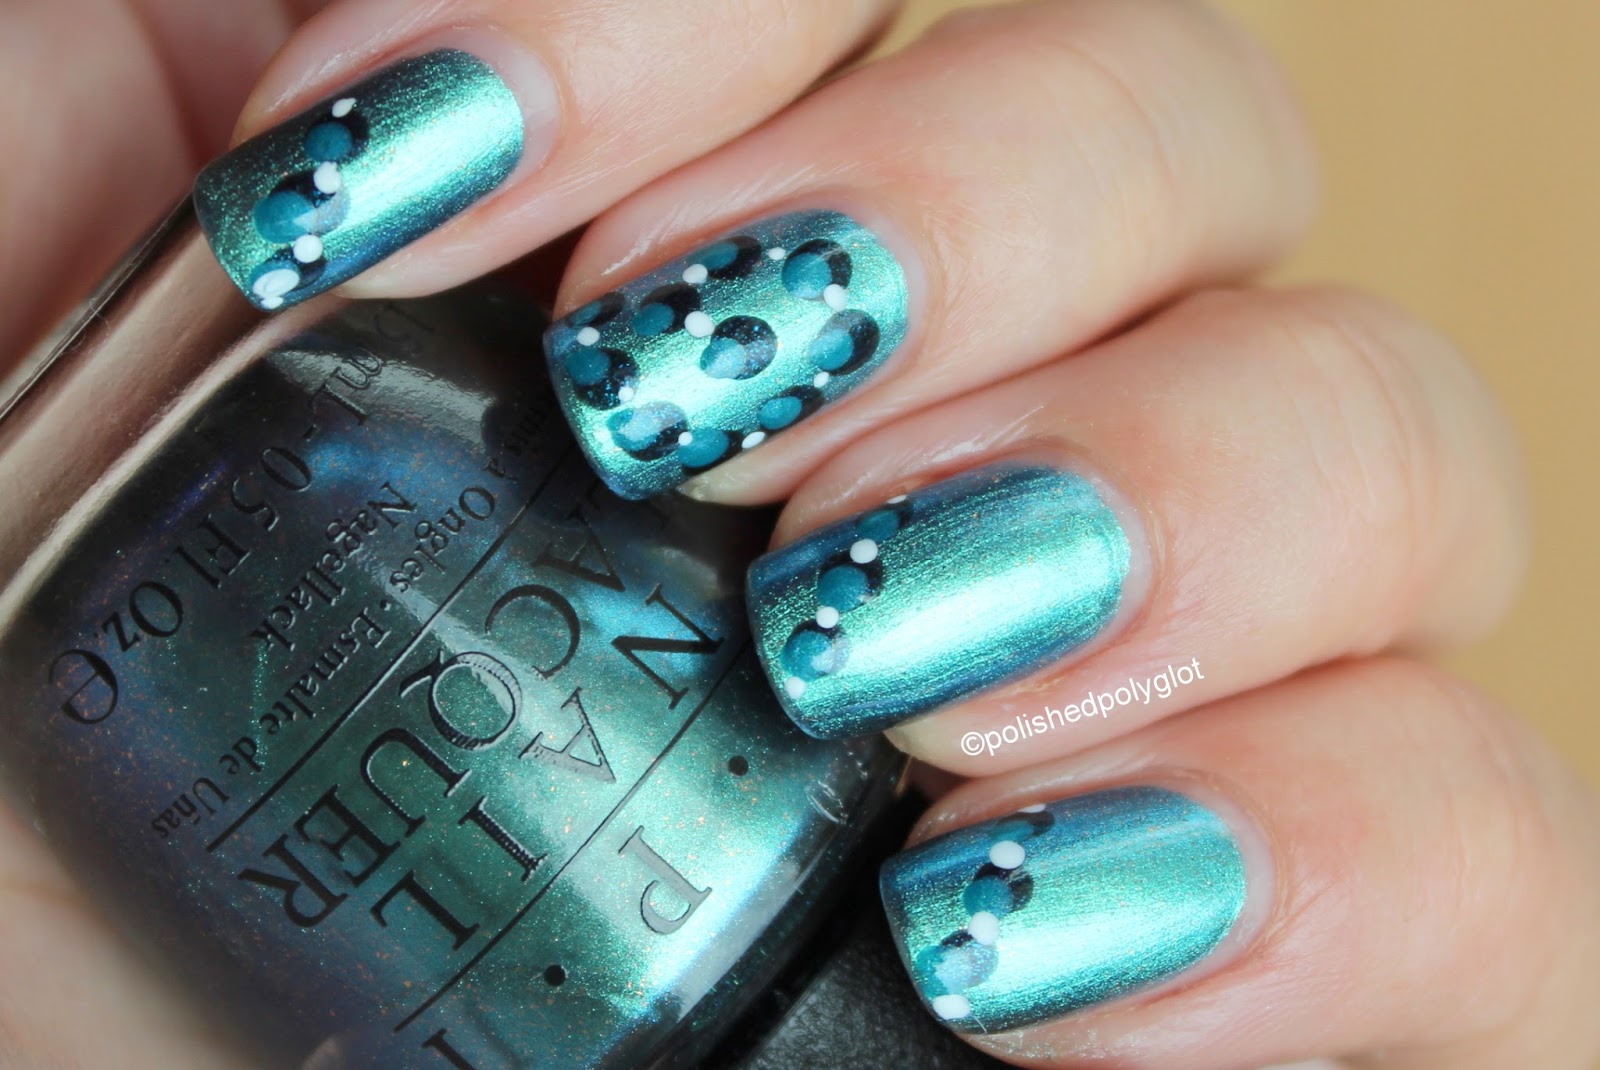 Teal and Black Nail Designs - wide 5